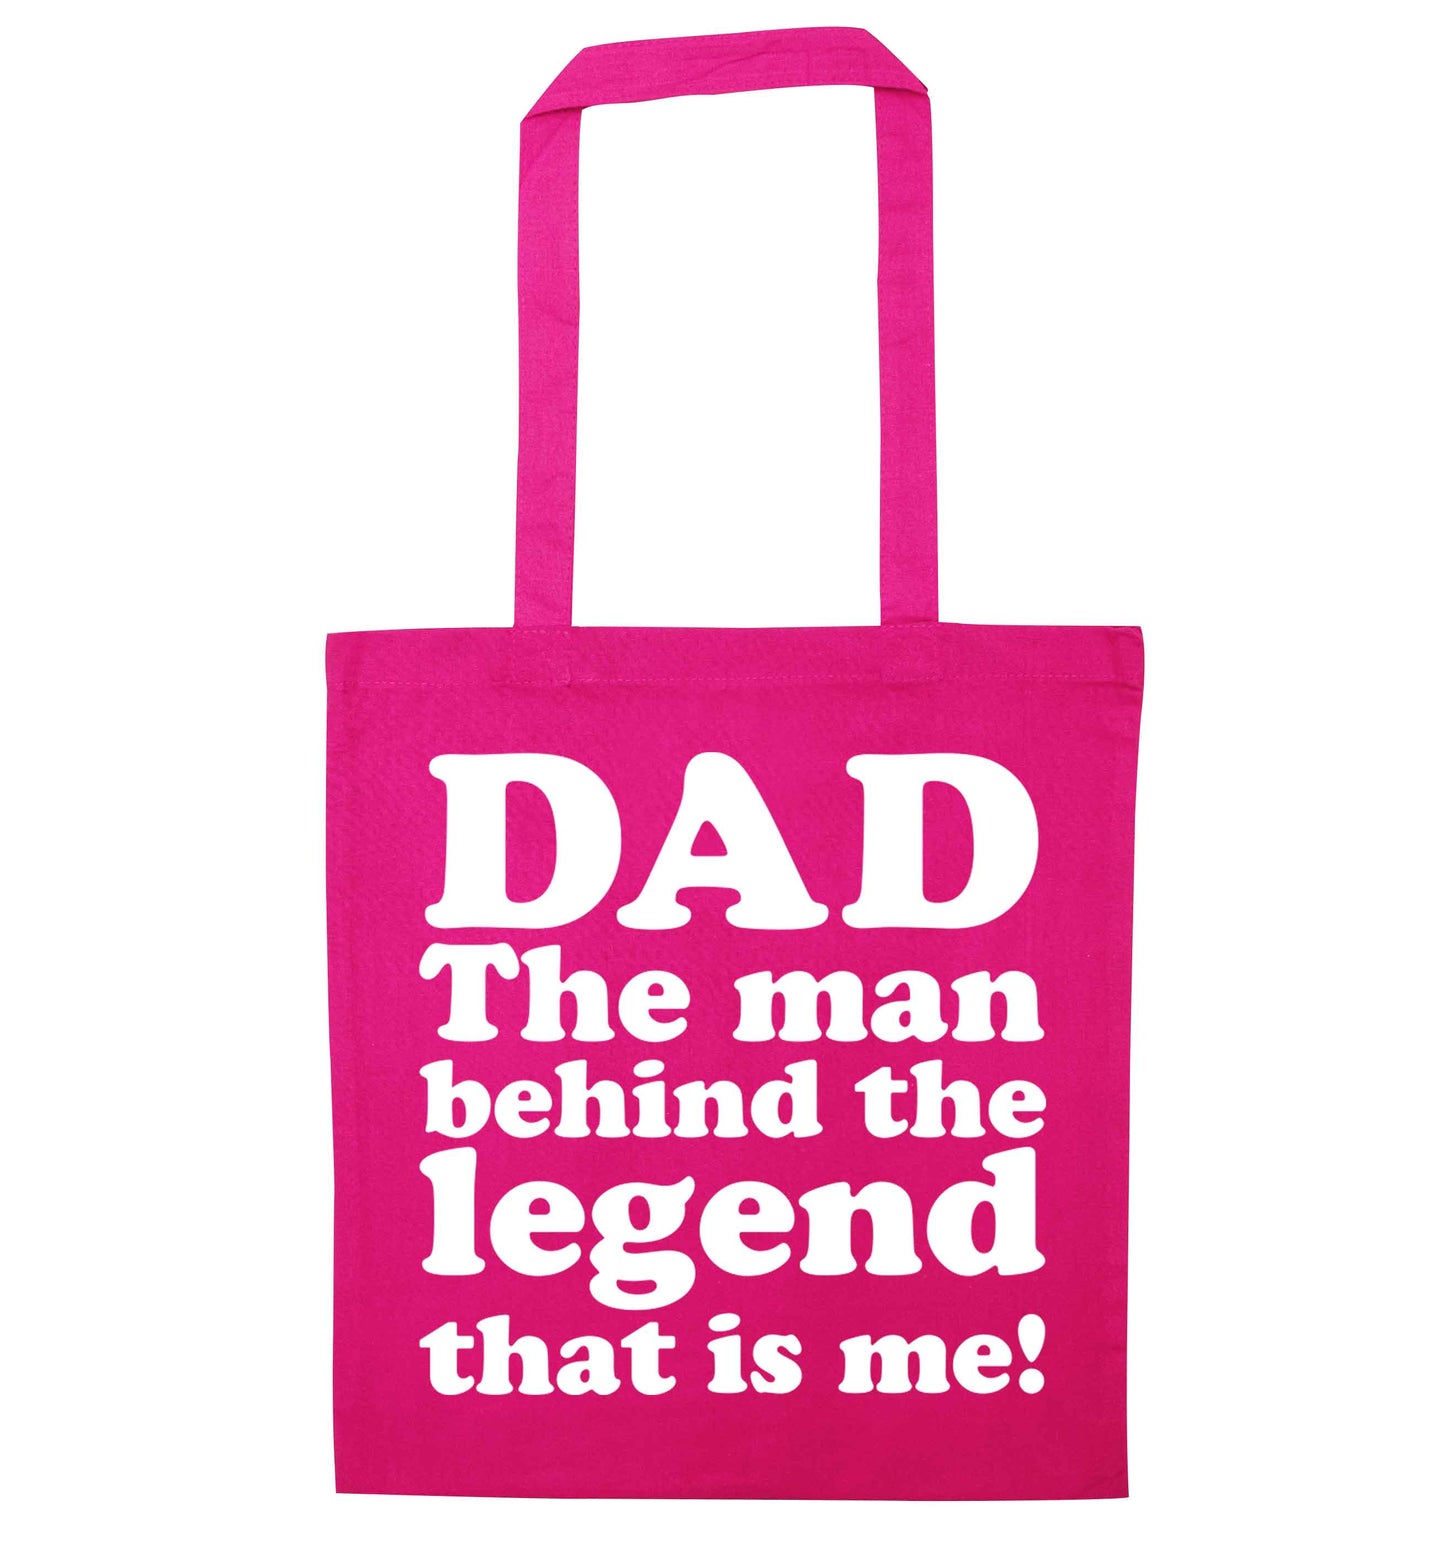 Dad the man behind the legend that is me pink tote bag